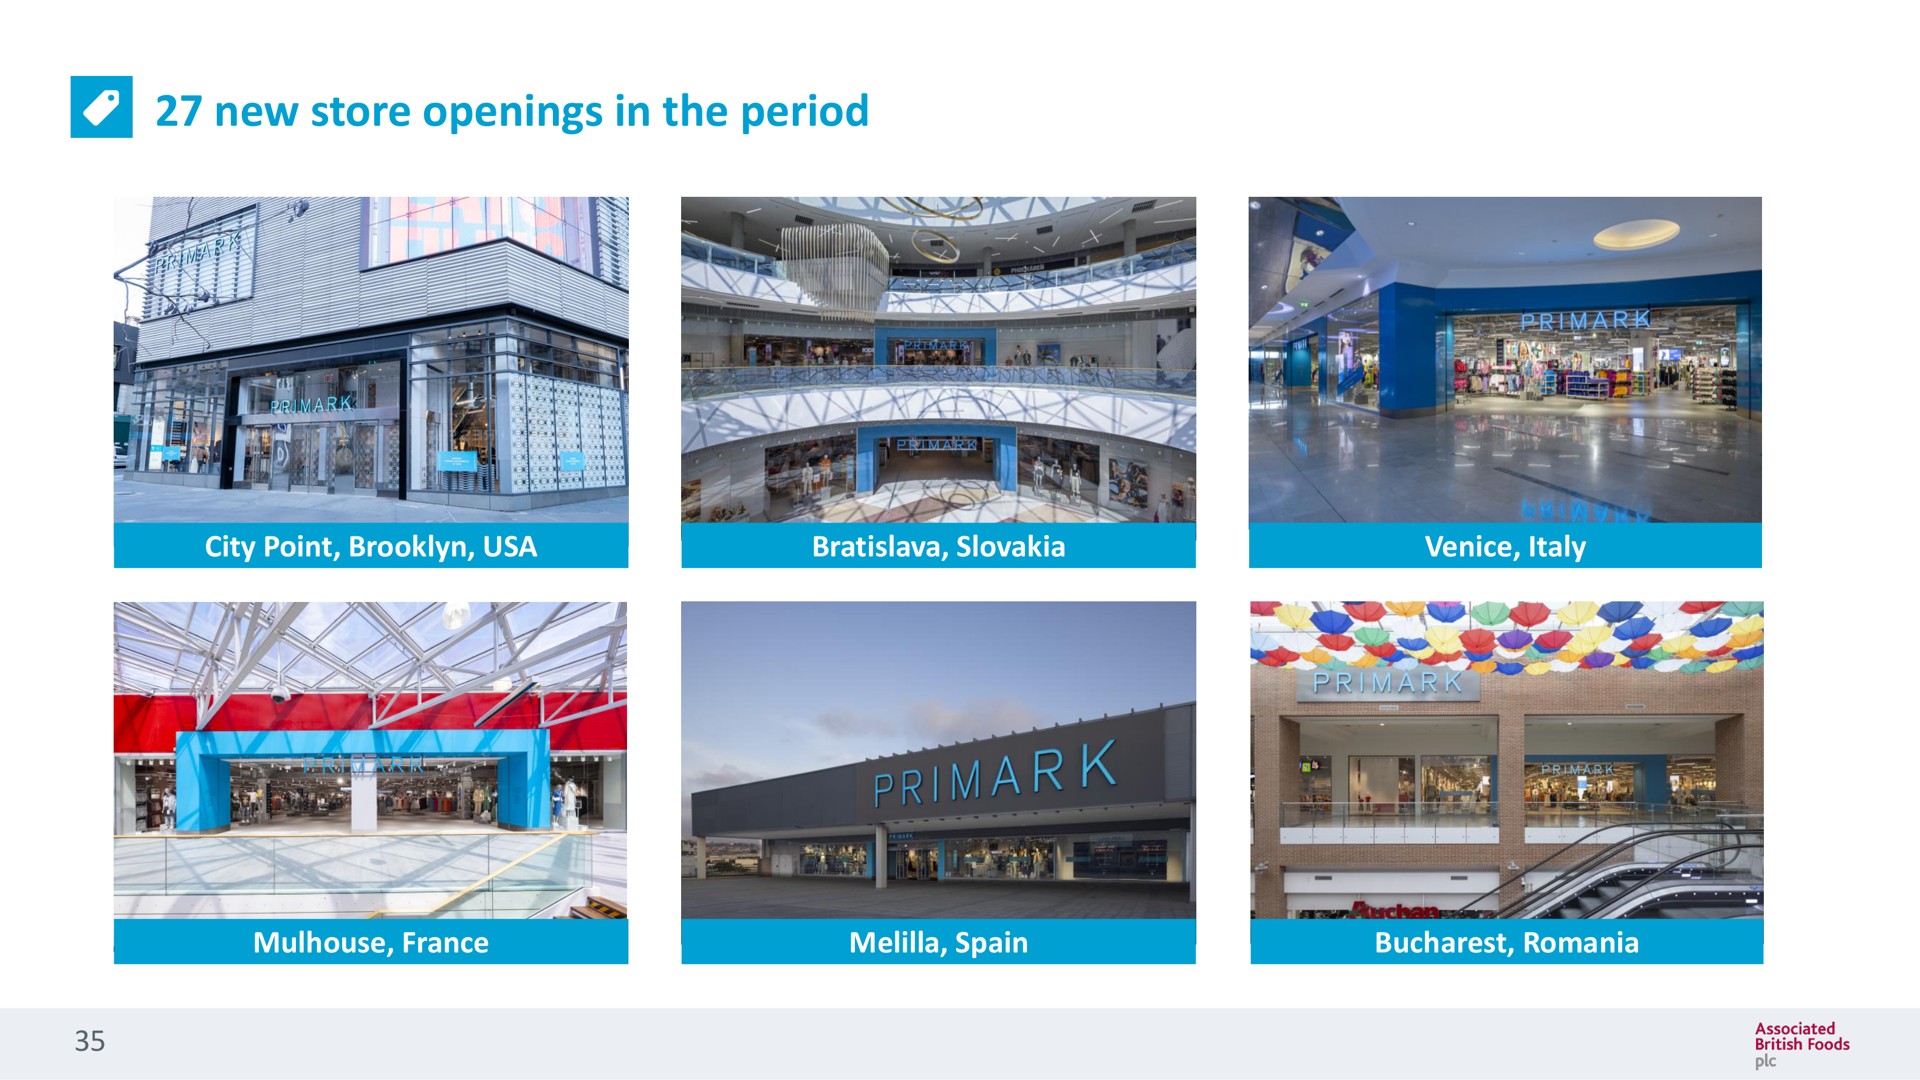 new store openings in the period | Associated British Foods